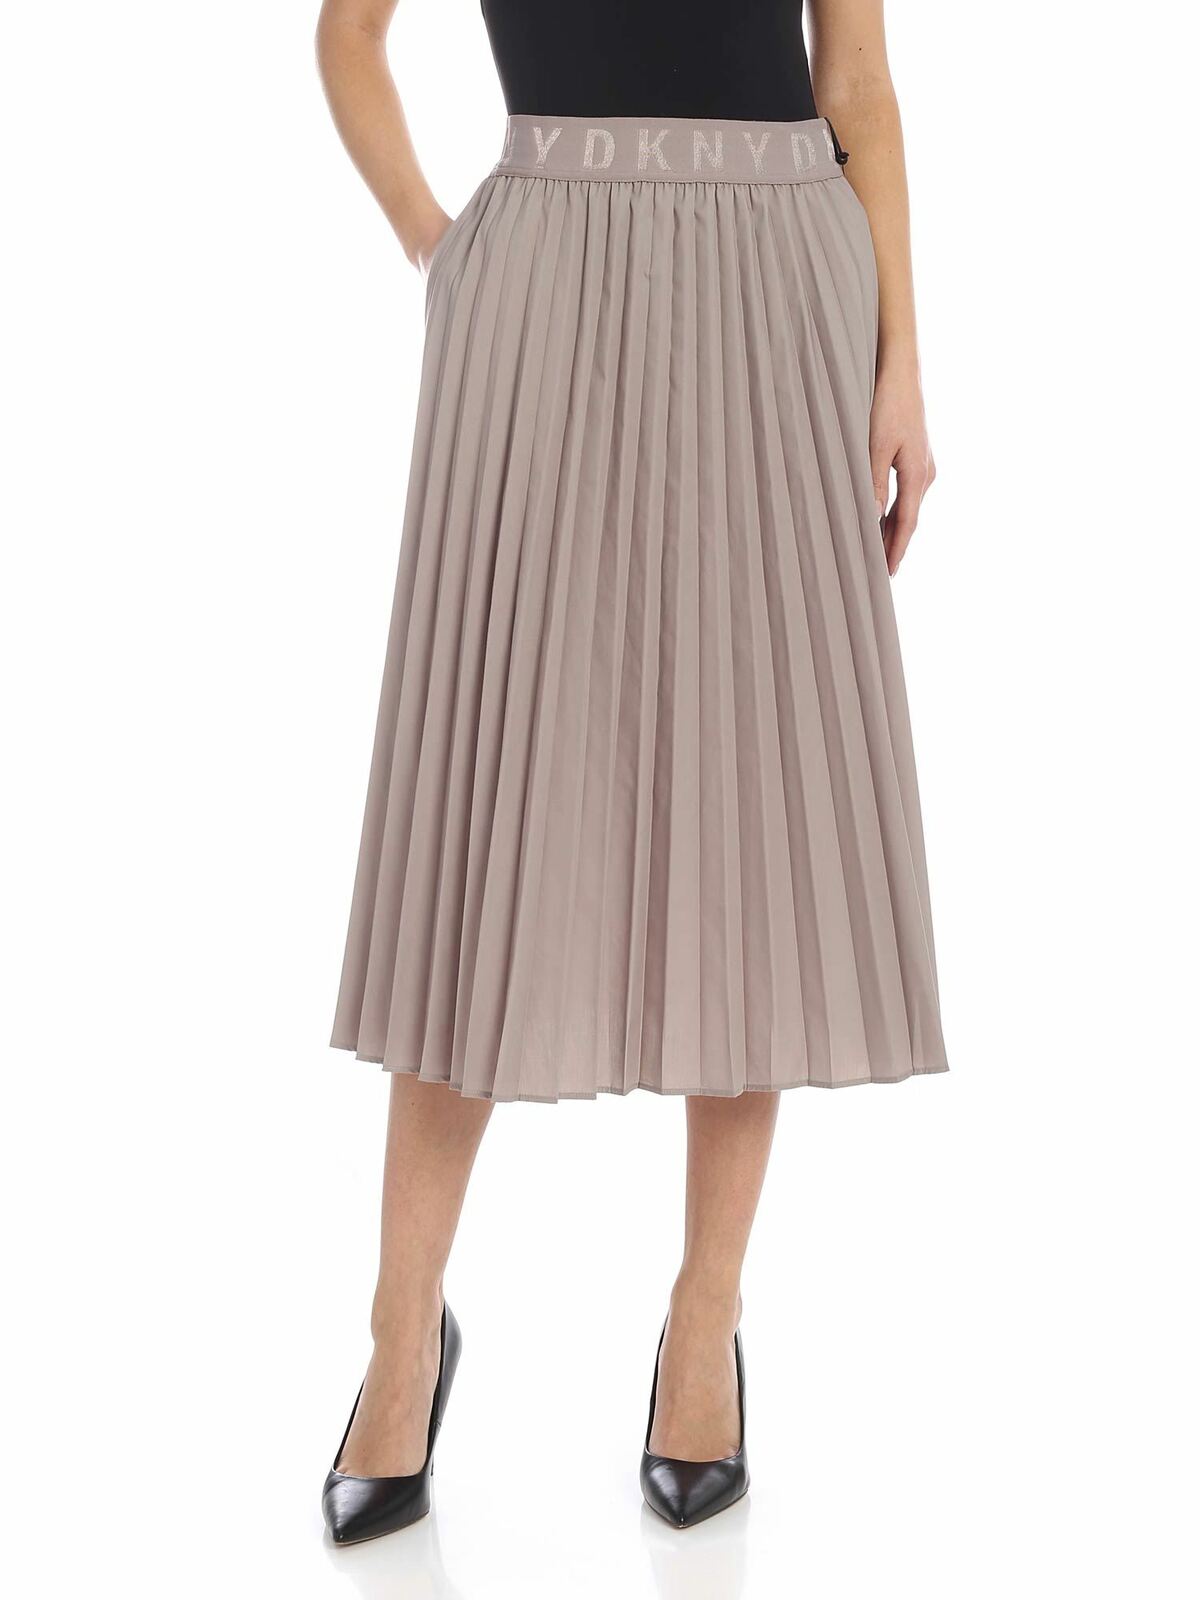 Dkny Pleated Skirt In Taupe Colour With Branded Ela In Brown